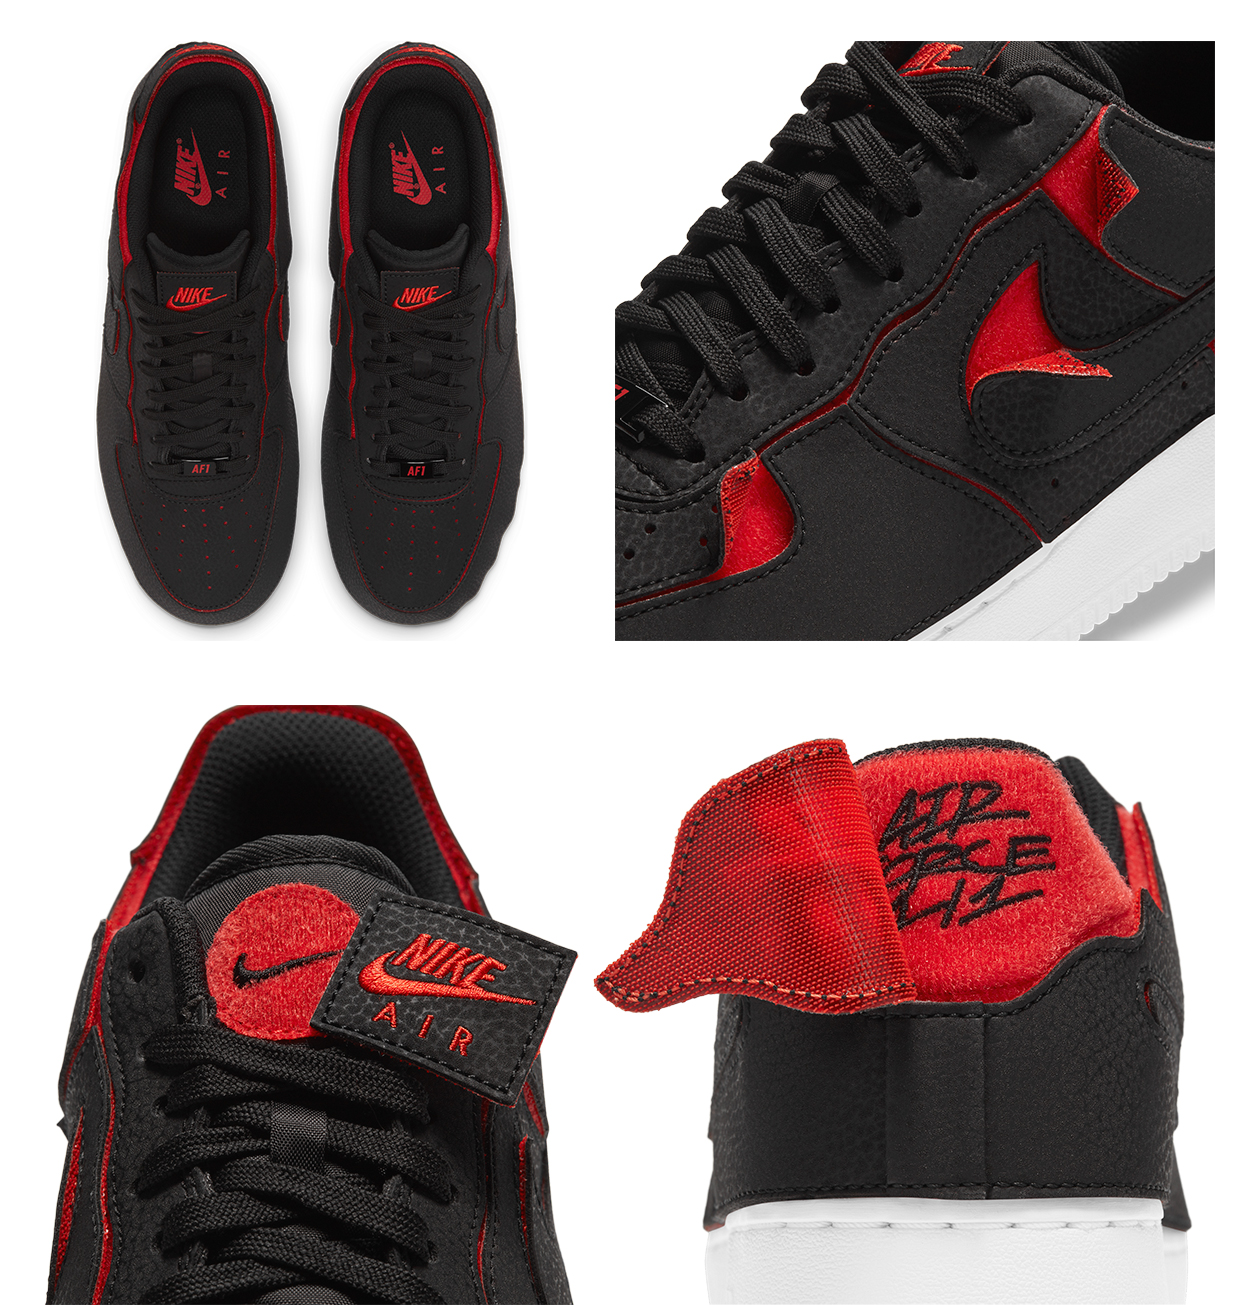 NIKE AIR FORCE 1 LOW 1/1 BLACK RED GREEN CUSTOM for £115.00